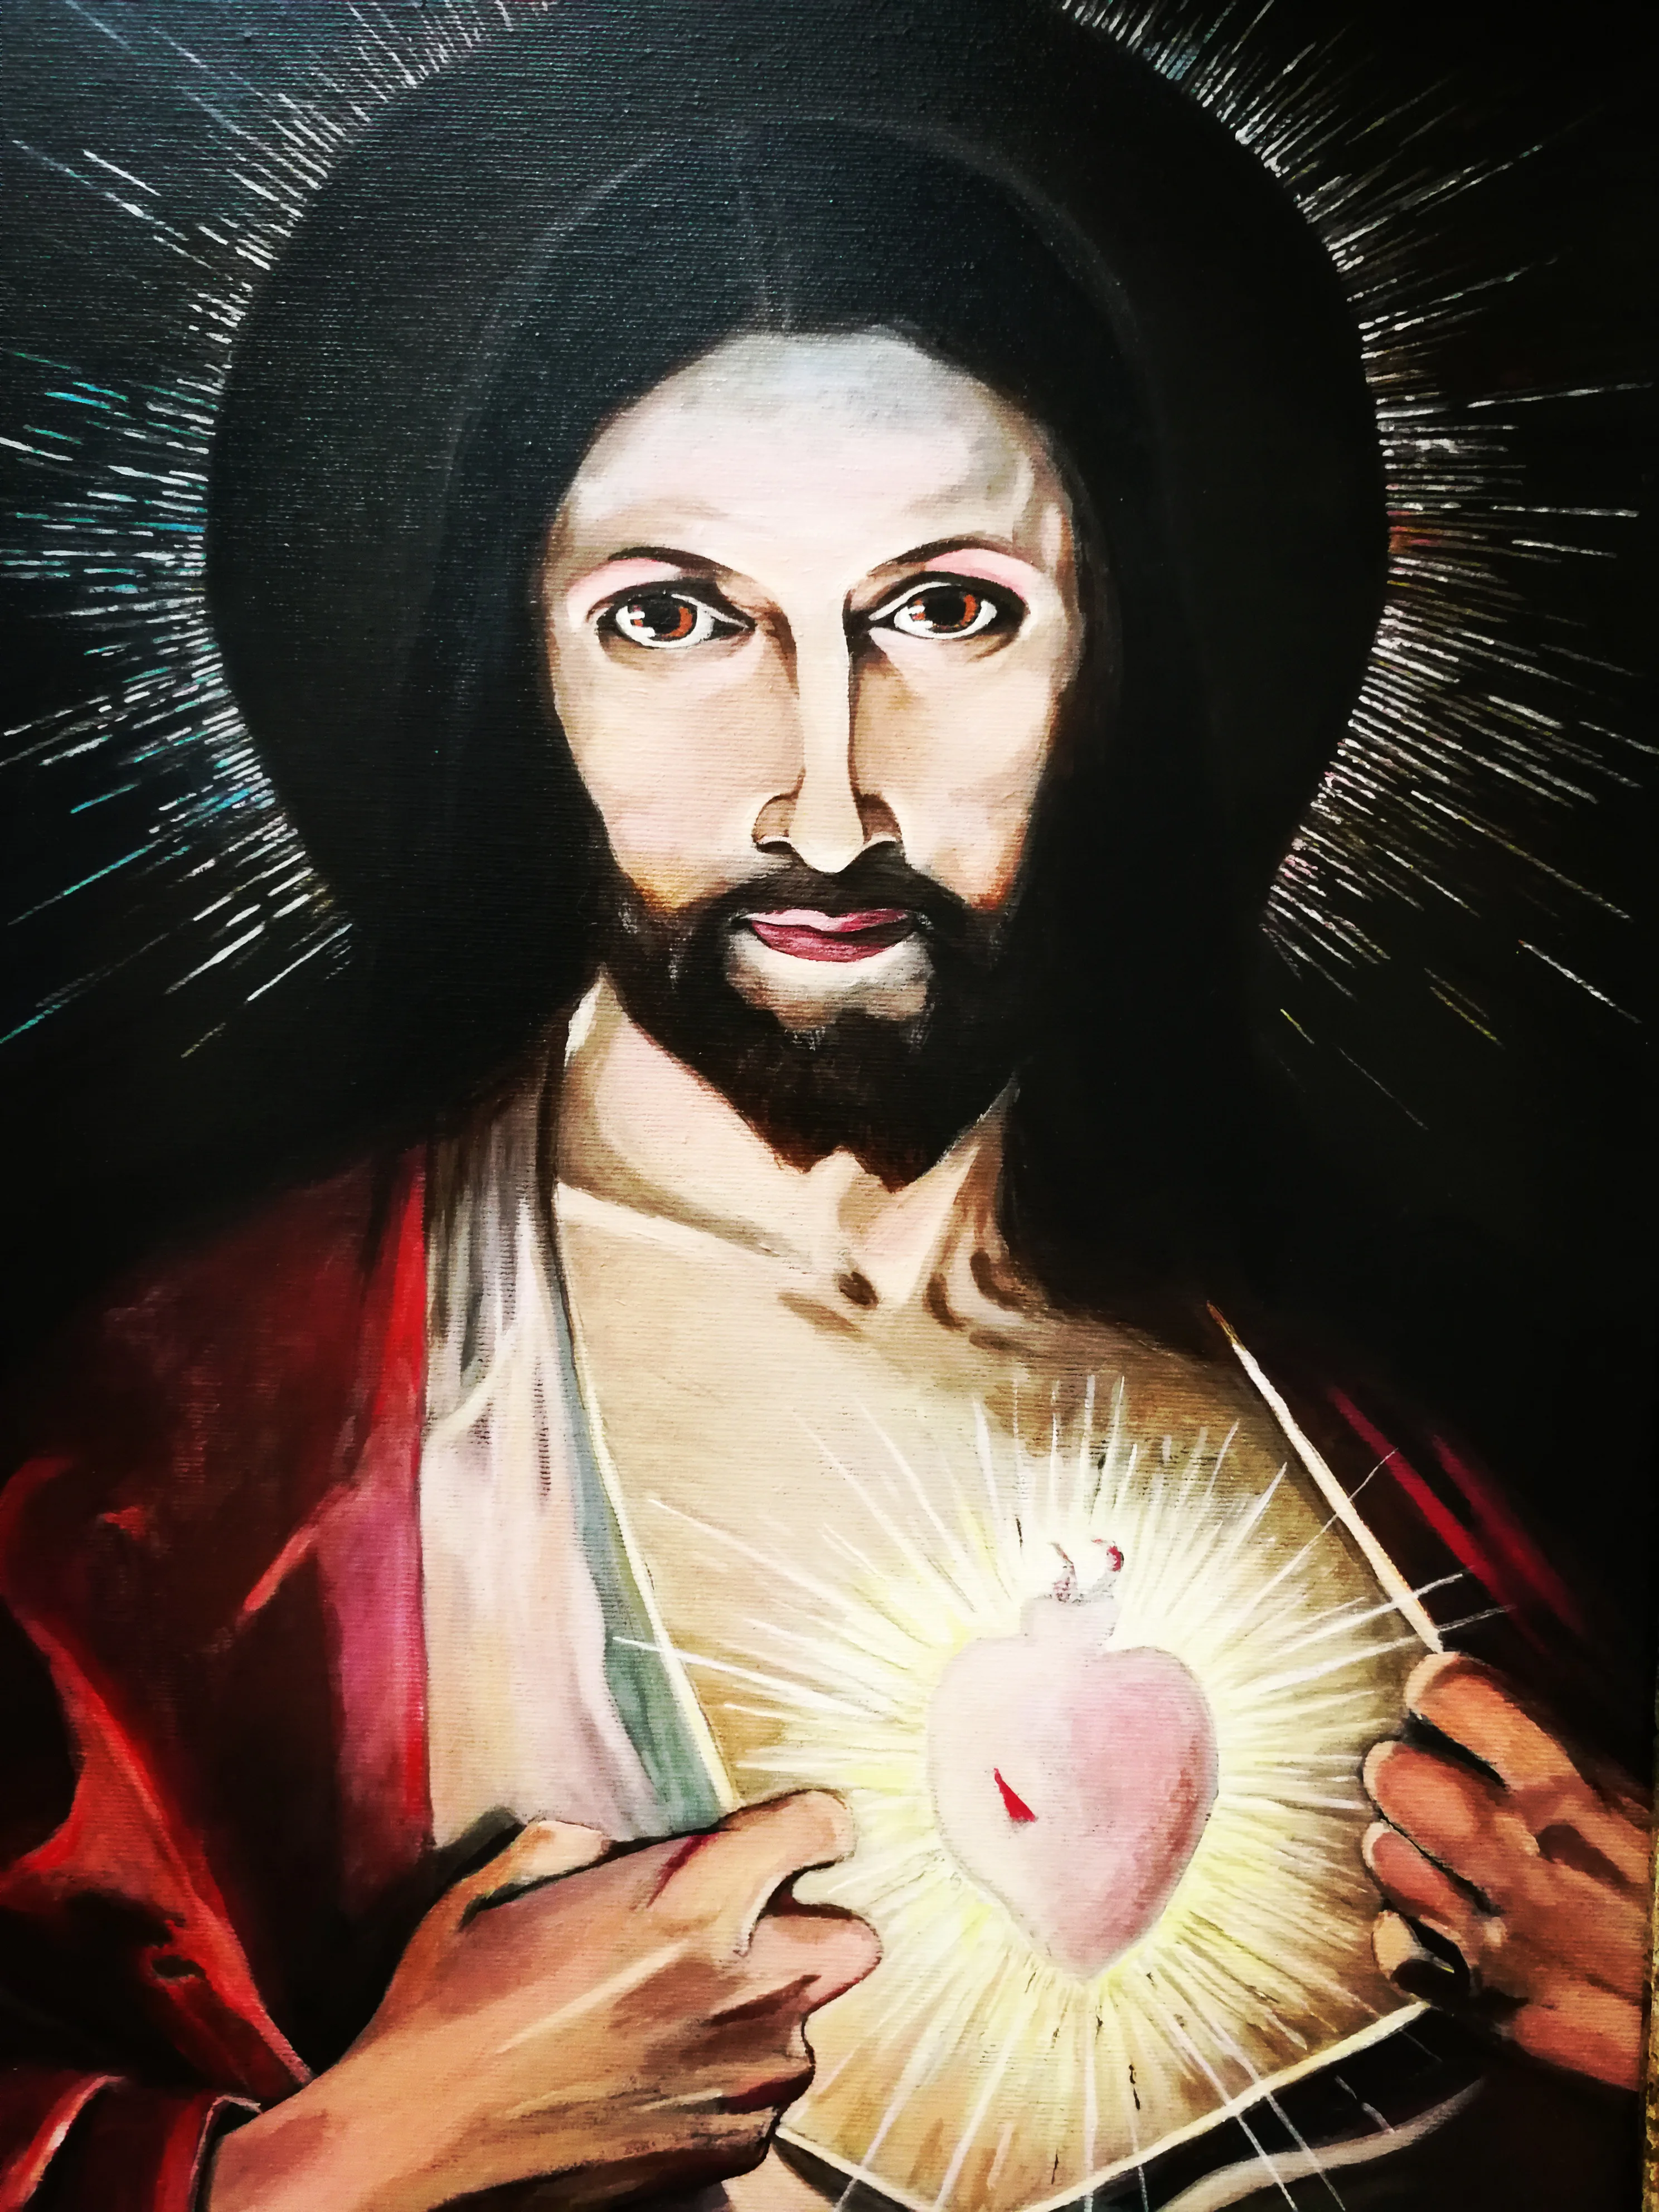 A detail of the painting depicting Jesus Christ, measuring 40x55 cm, made using oil on canvas technique